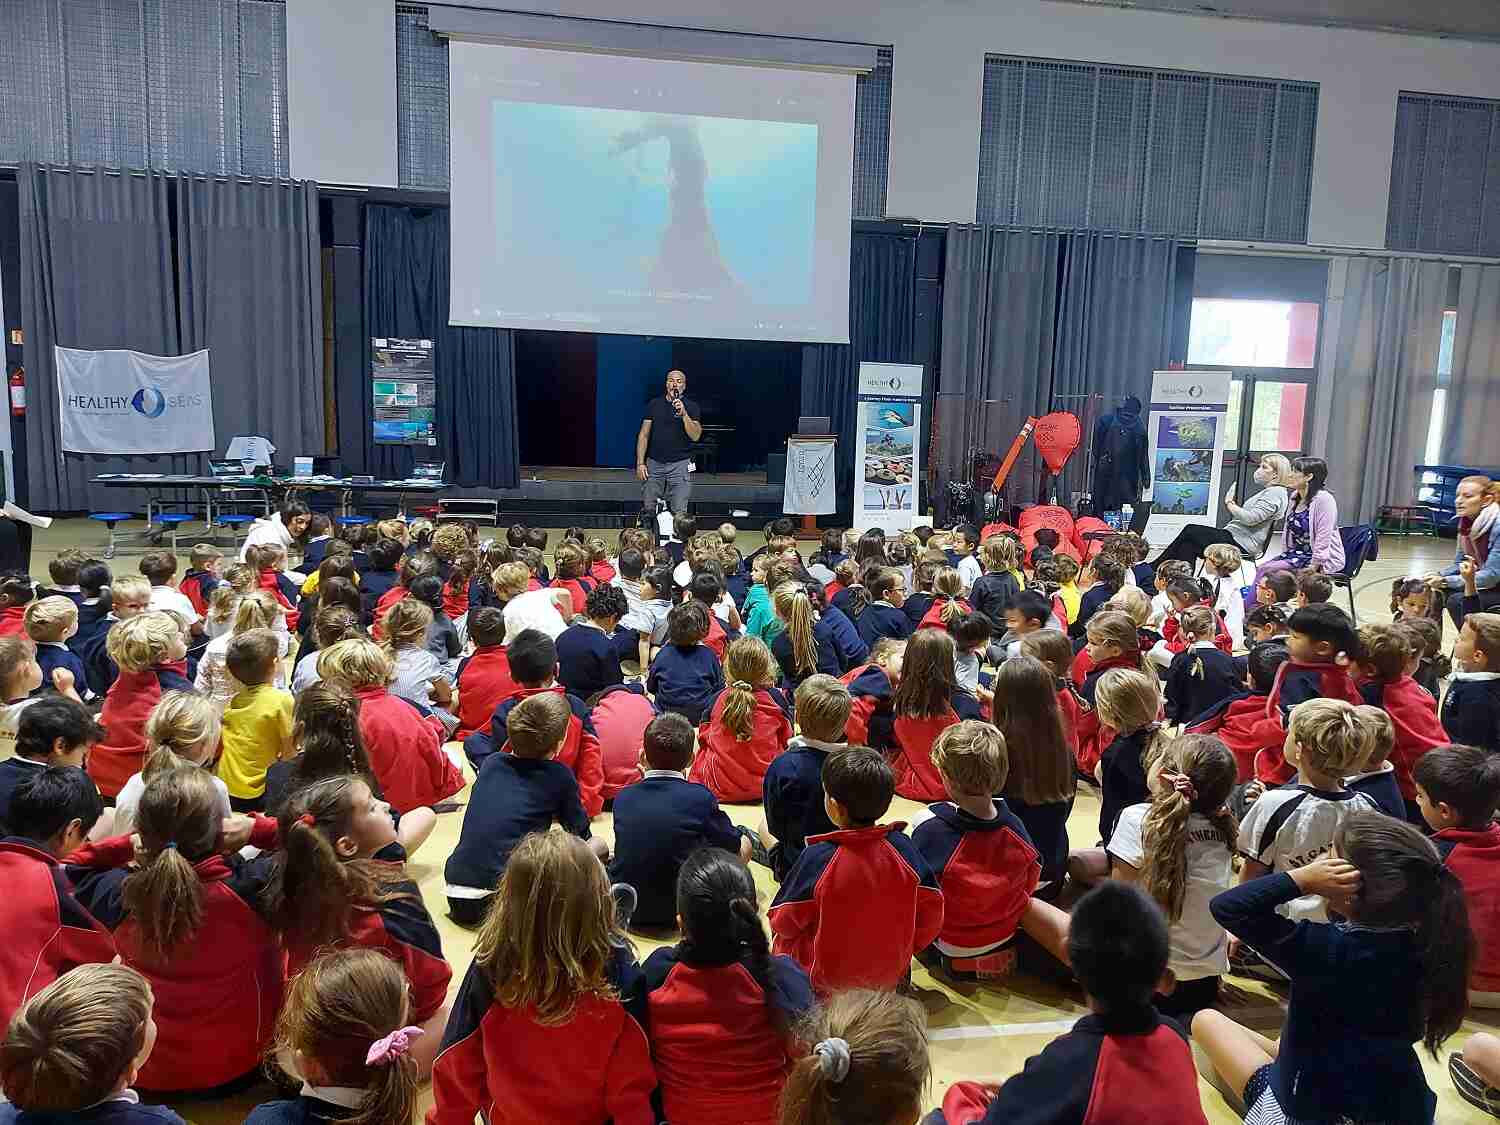 3400 children engaged in education programs: one of the Healthy Seas Foundation Results in 2022